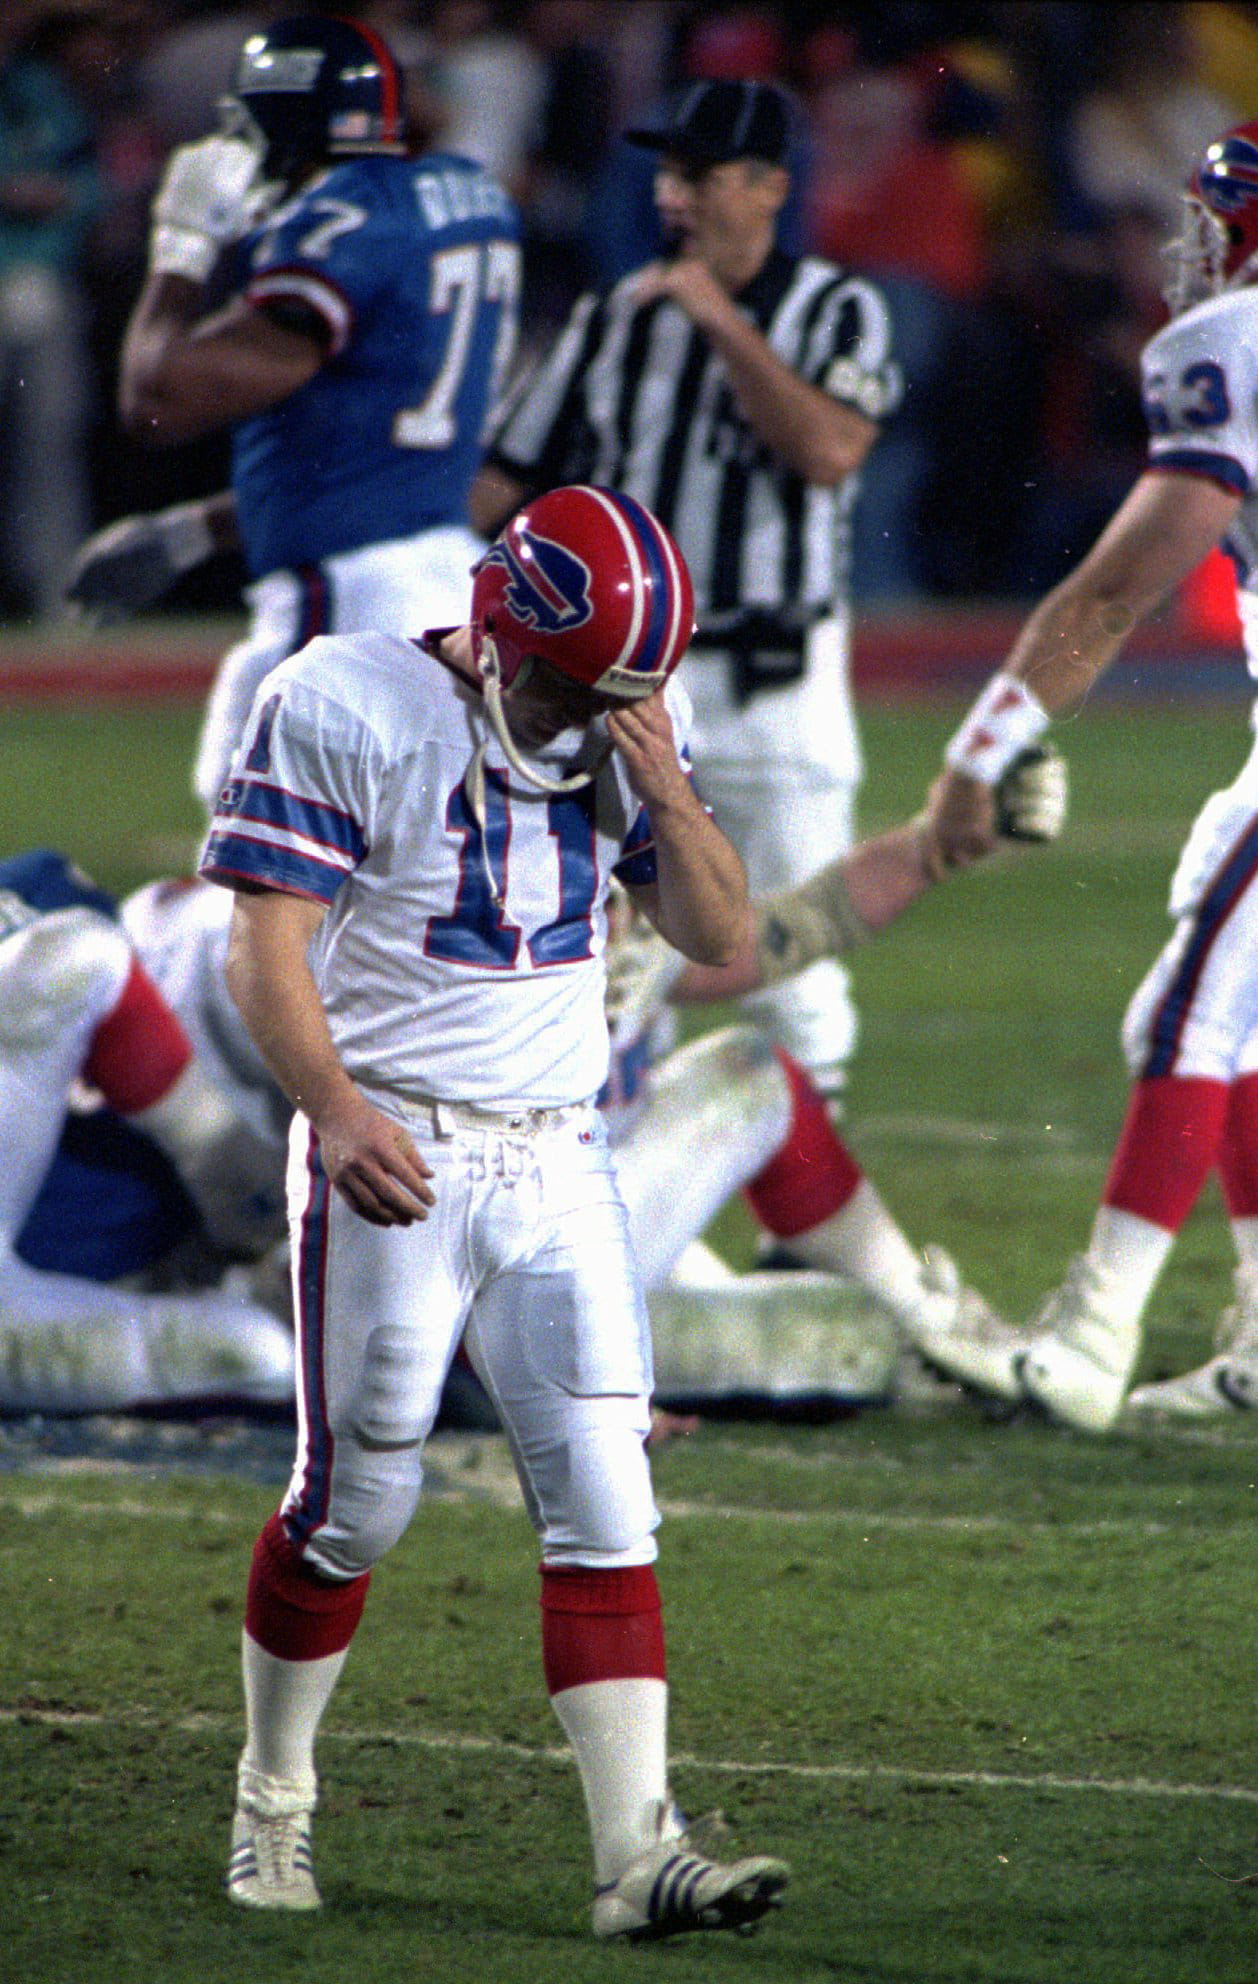 Buffalo Bills kicker Scott Norwood walks off after missing what would have been the winning field goal in Super Bowl XXV against the New York Giants.